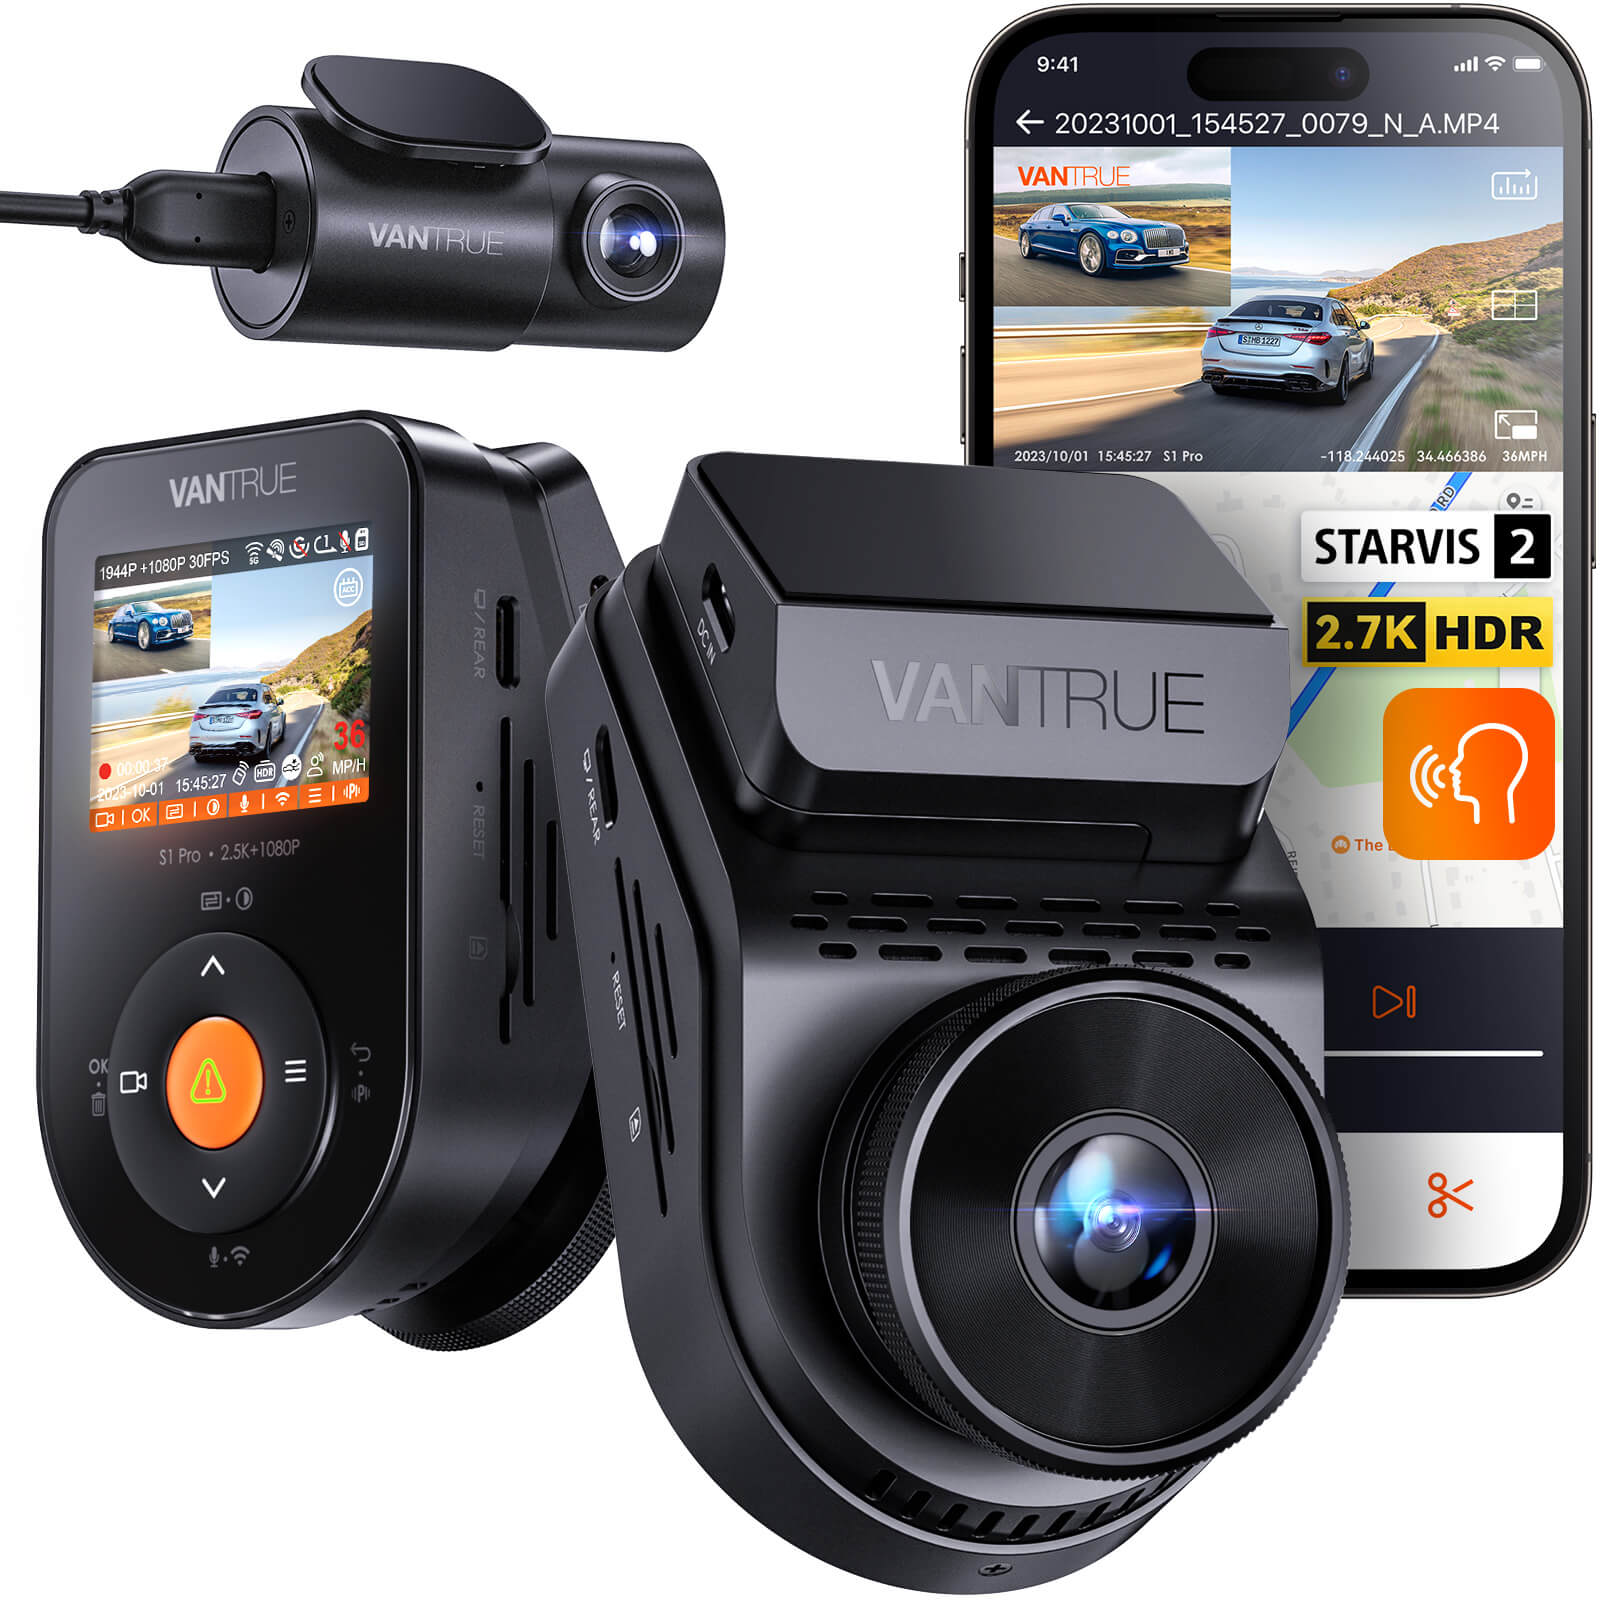 Vantrue S1 Pro 2.7K Front and Rear 5G WiFi Dash Cam, 1944P Dual Hidden Dash  Camera for Cars, STARVIS 2 IMX675 Night Vision, Built-in GPS, Voice Control